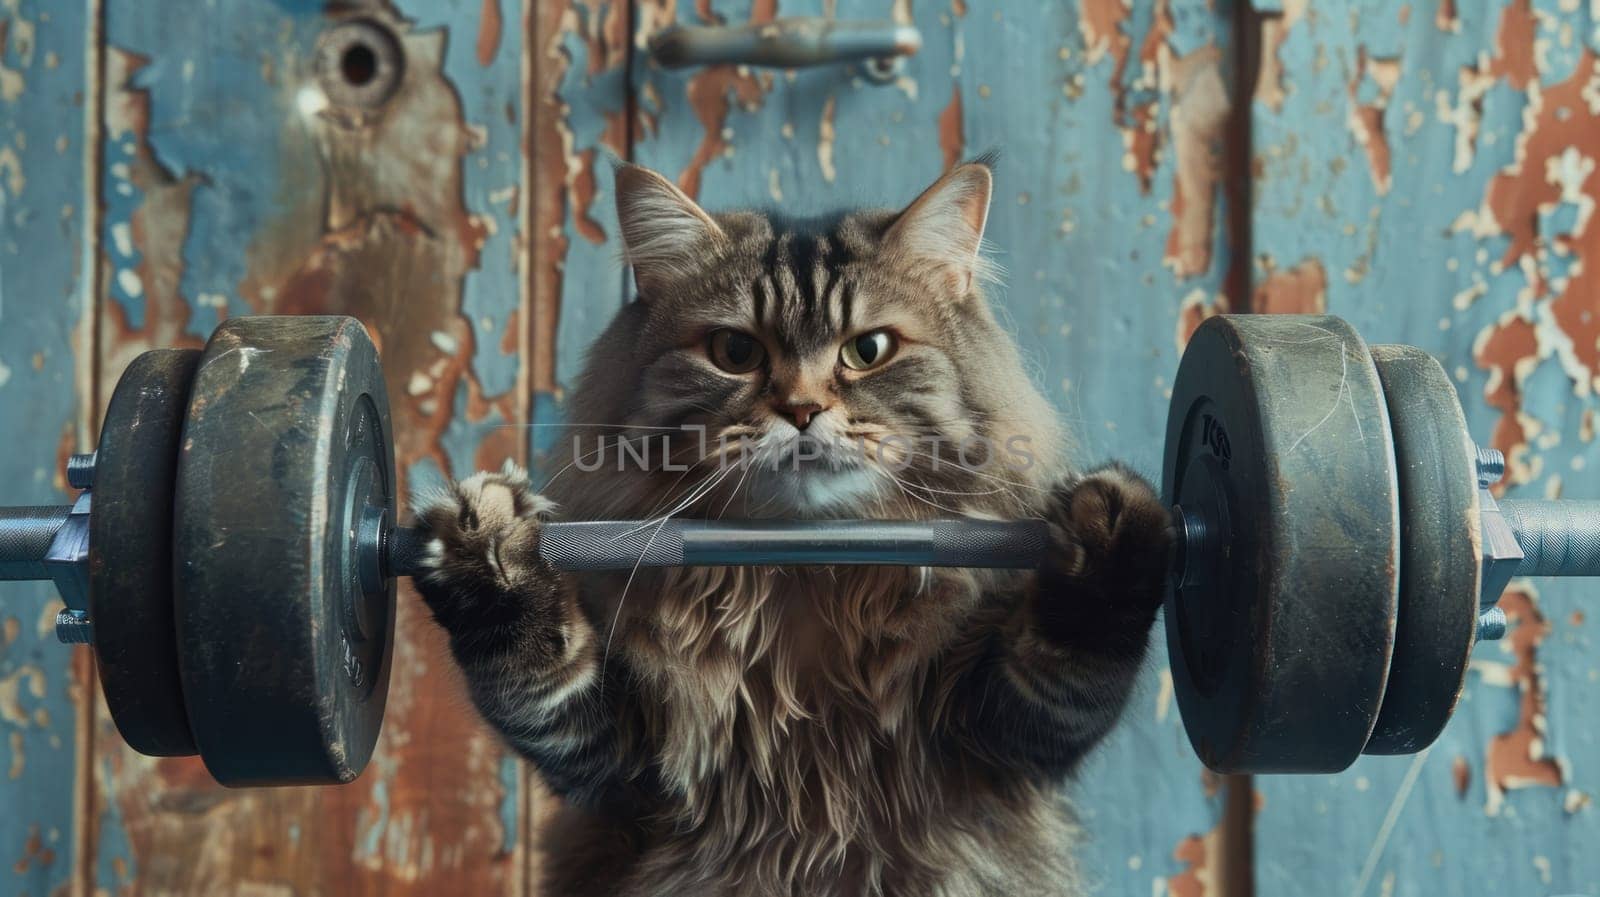 A cat is holding a dumbbell in its paws.